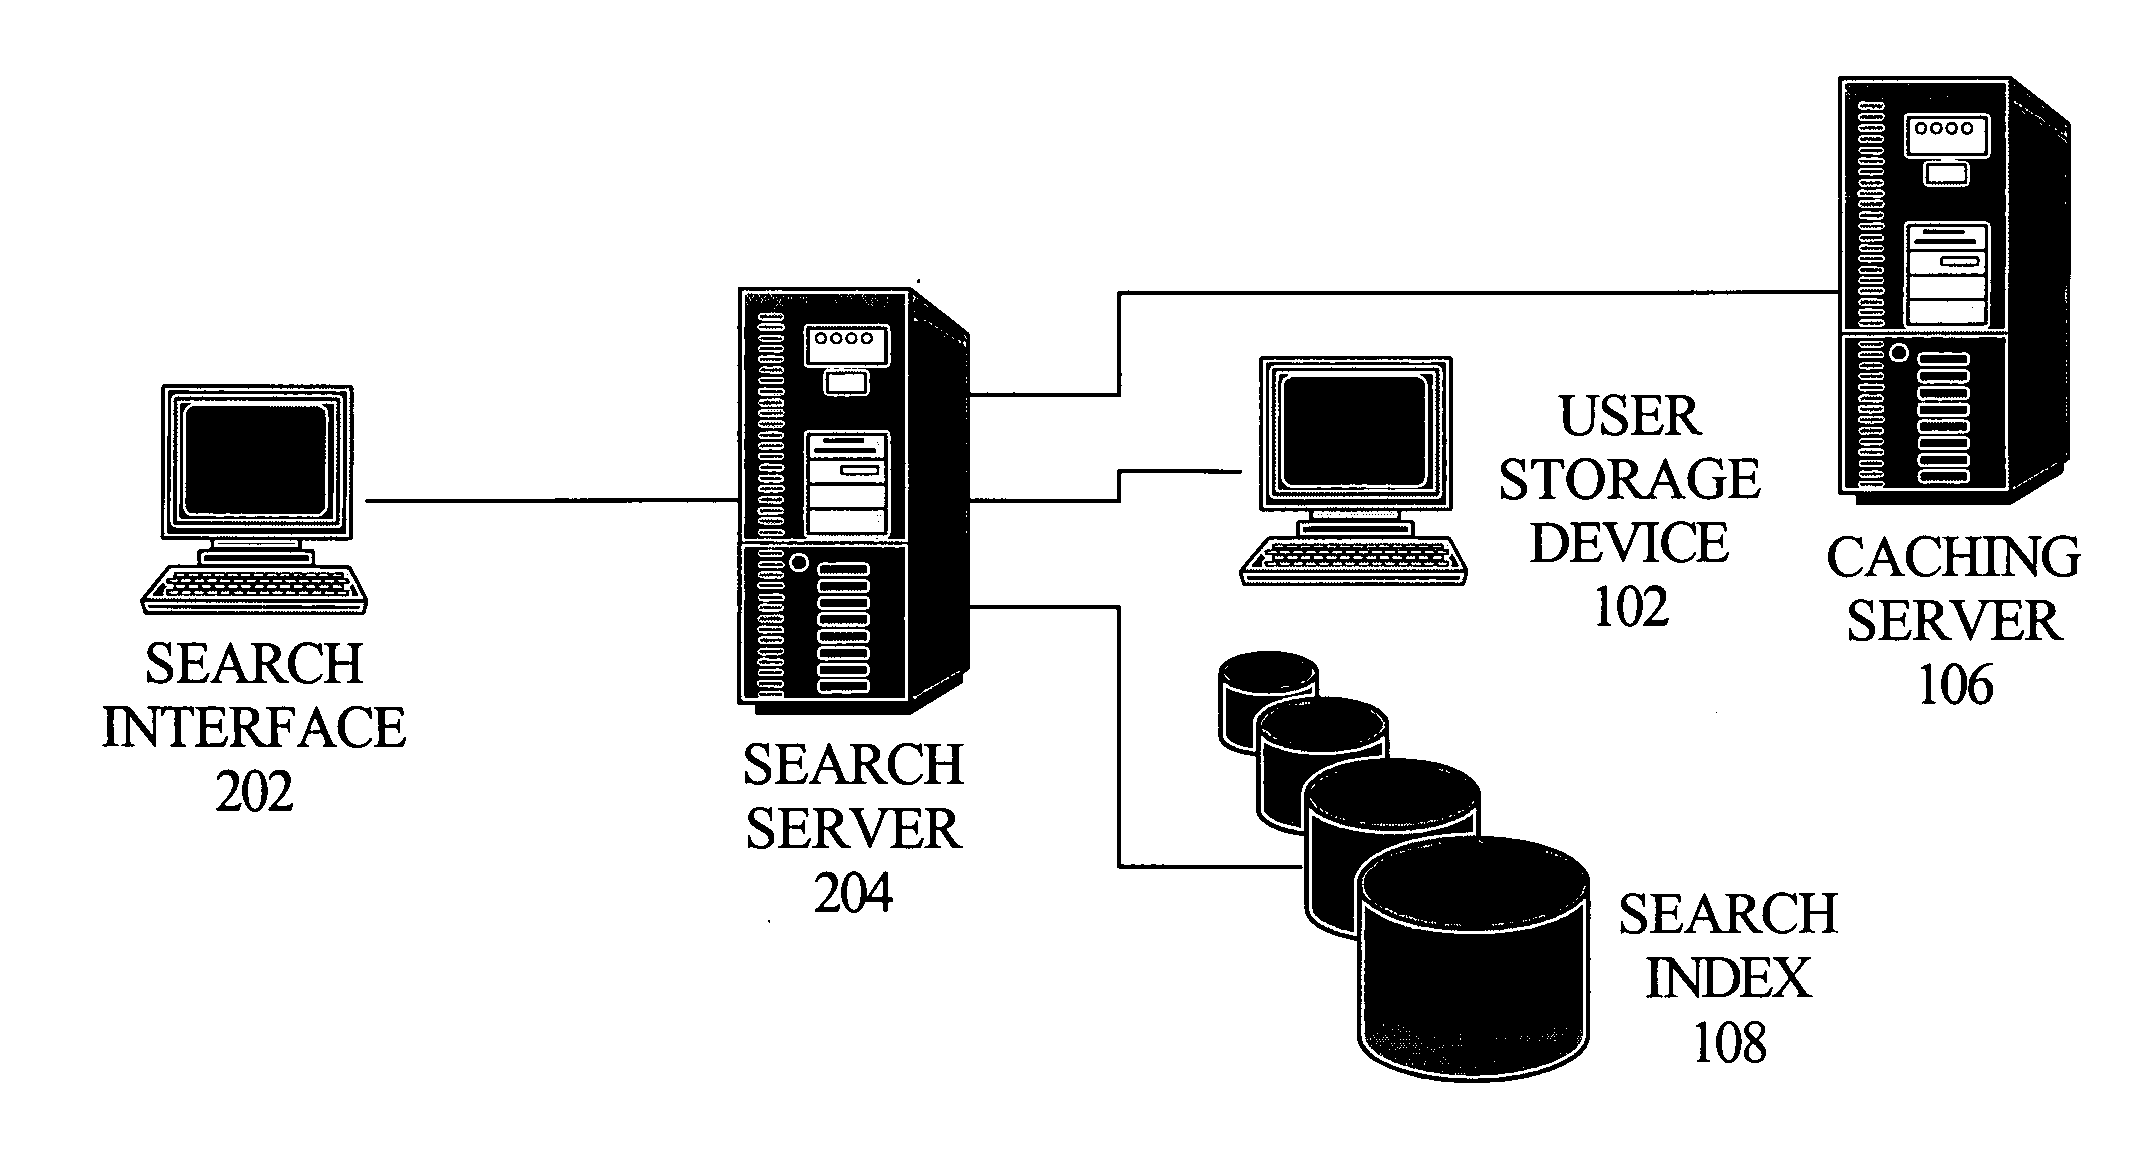 User content feeds from user storage devices to a public search engine